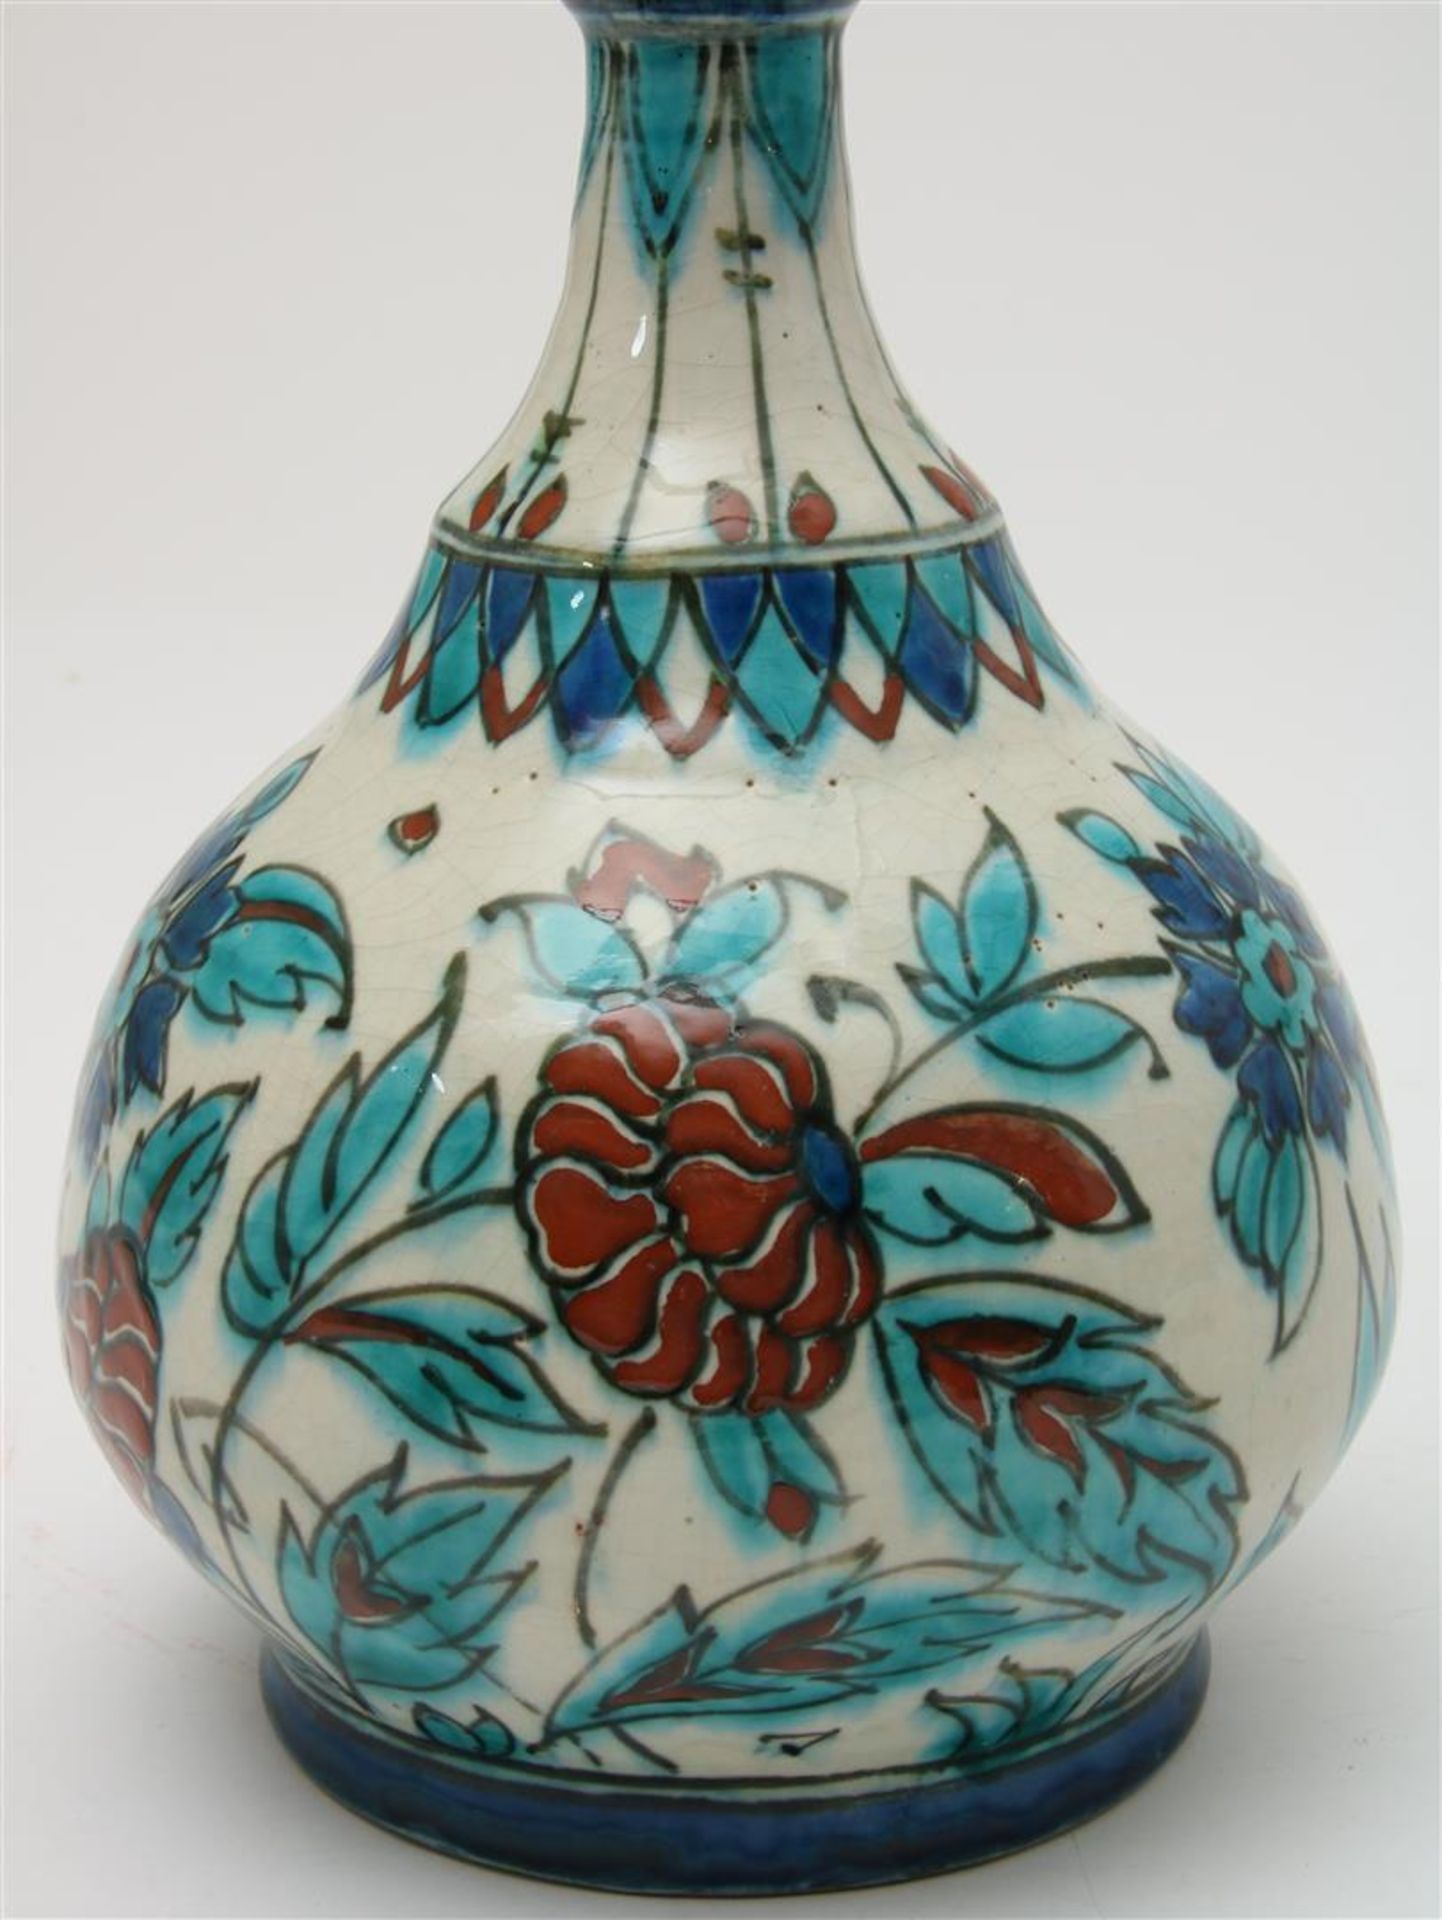 Polychrome earthenware 'New Delft' or 'Iznik' vase with narrow neck and Persian flower decor. - Image 2 of 8